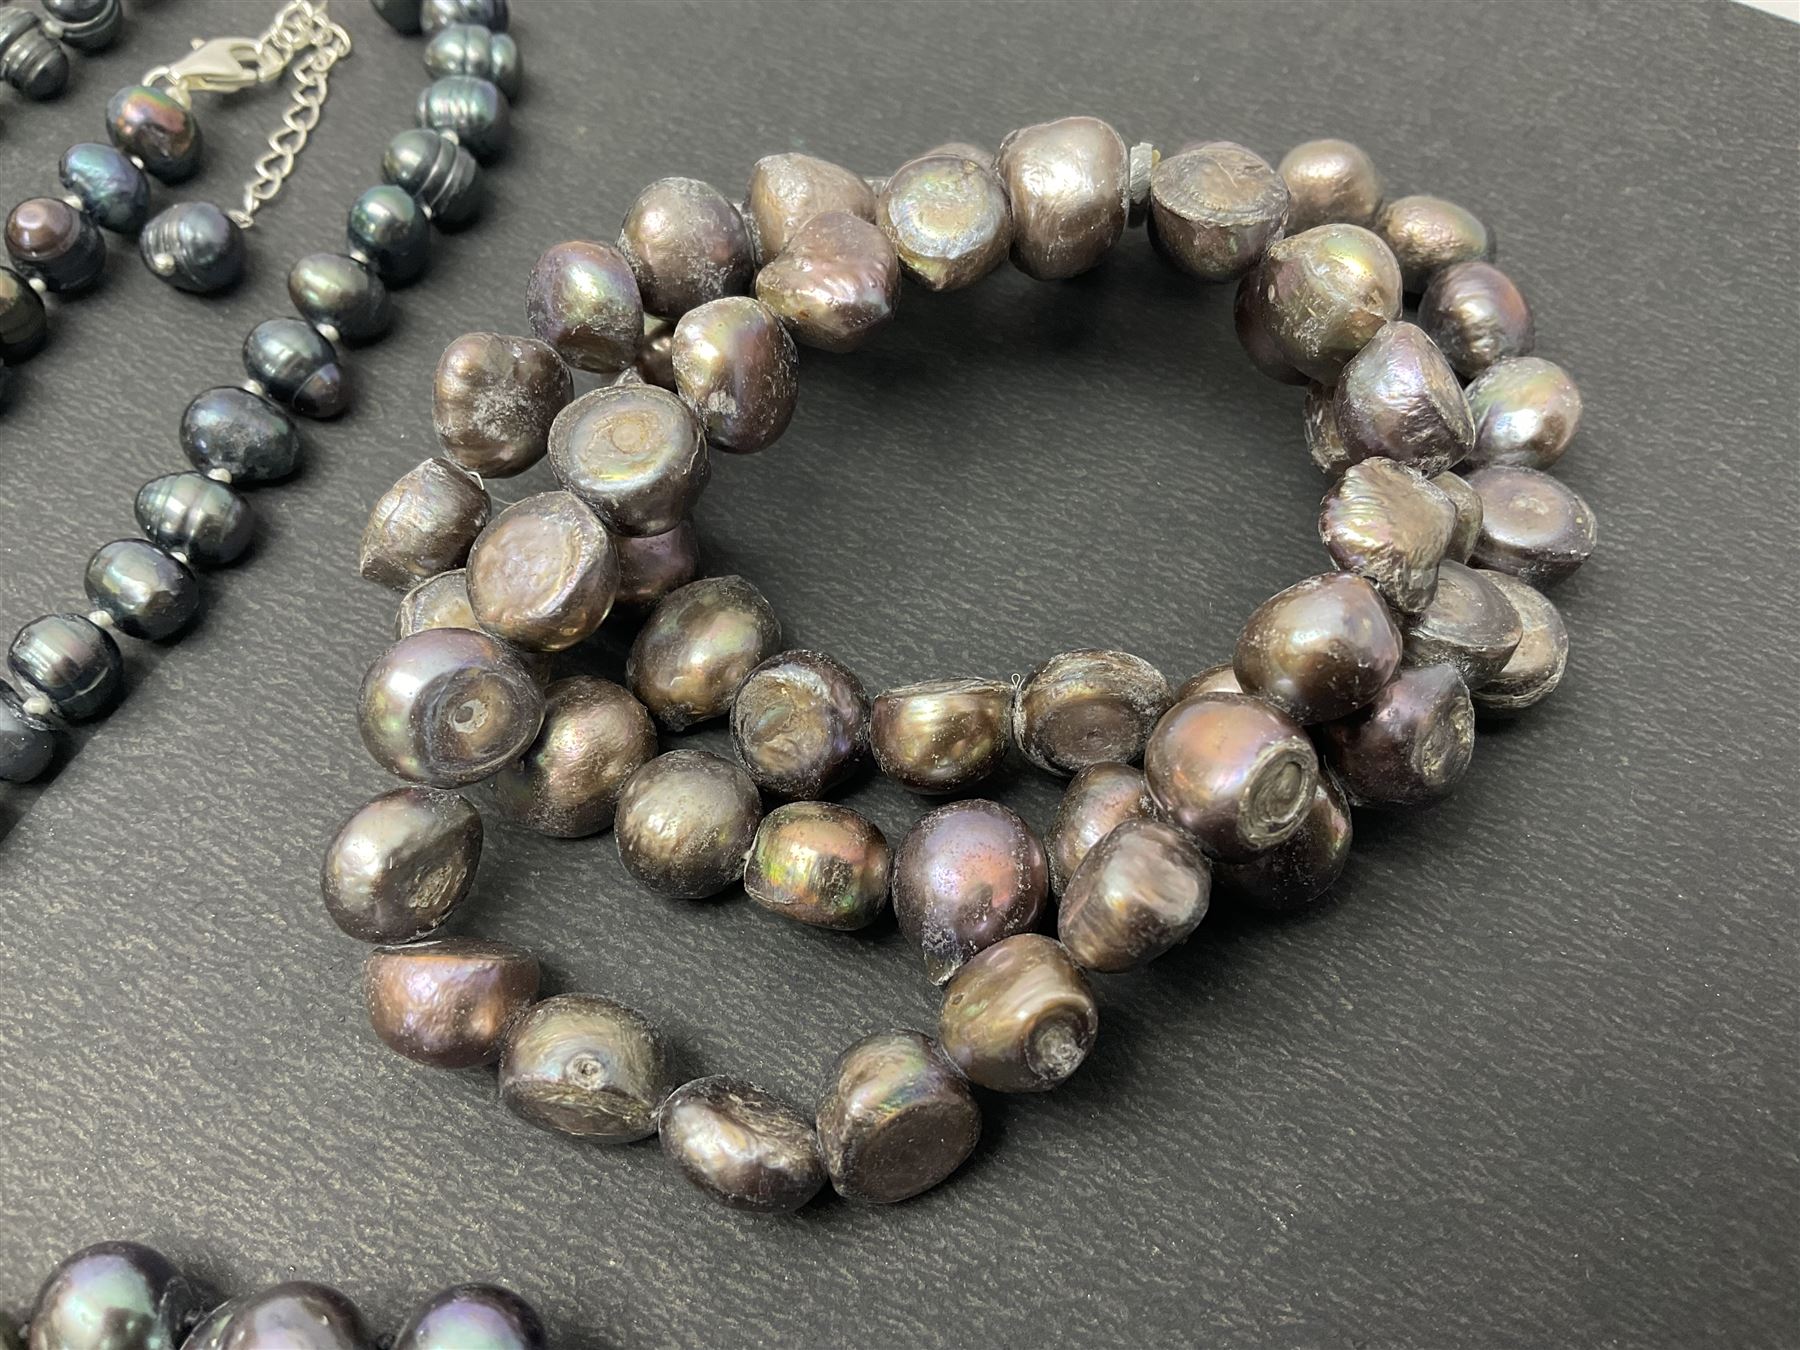 Four fresh water pearl necklaces - Image 27 of 77